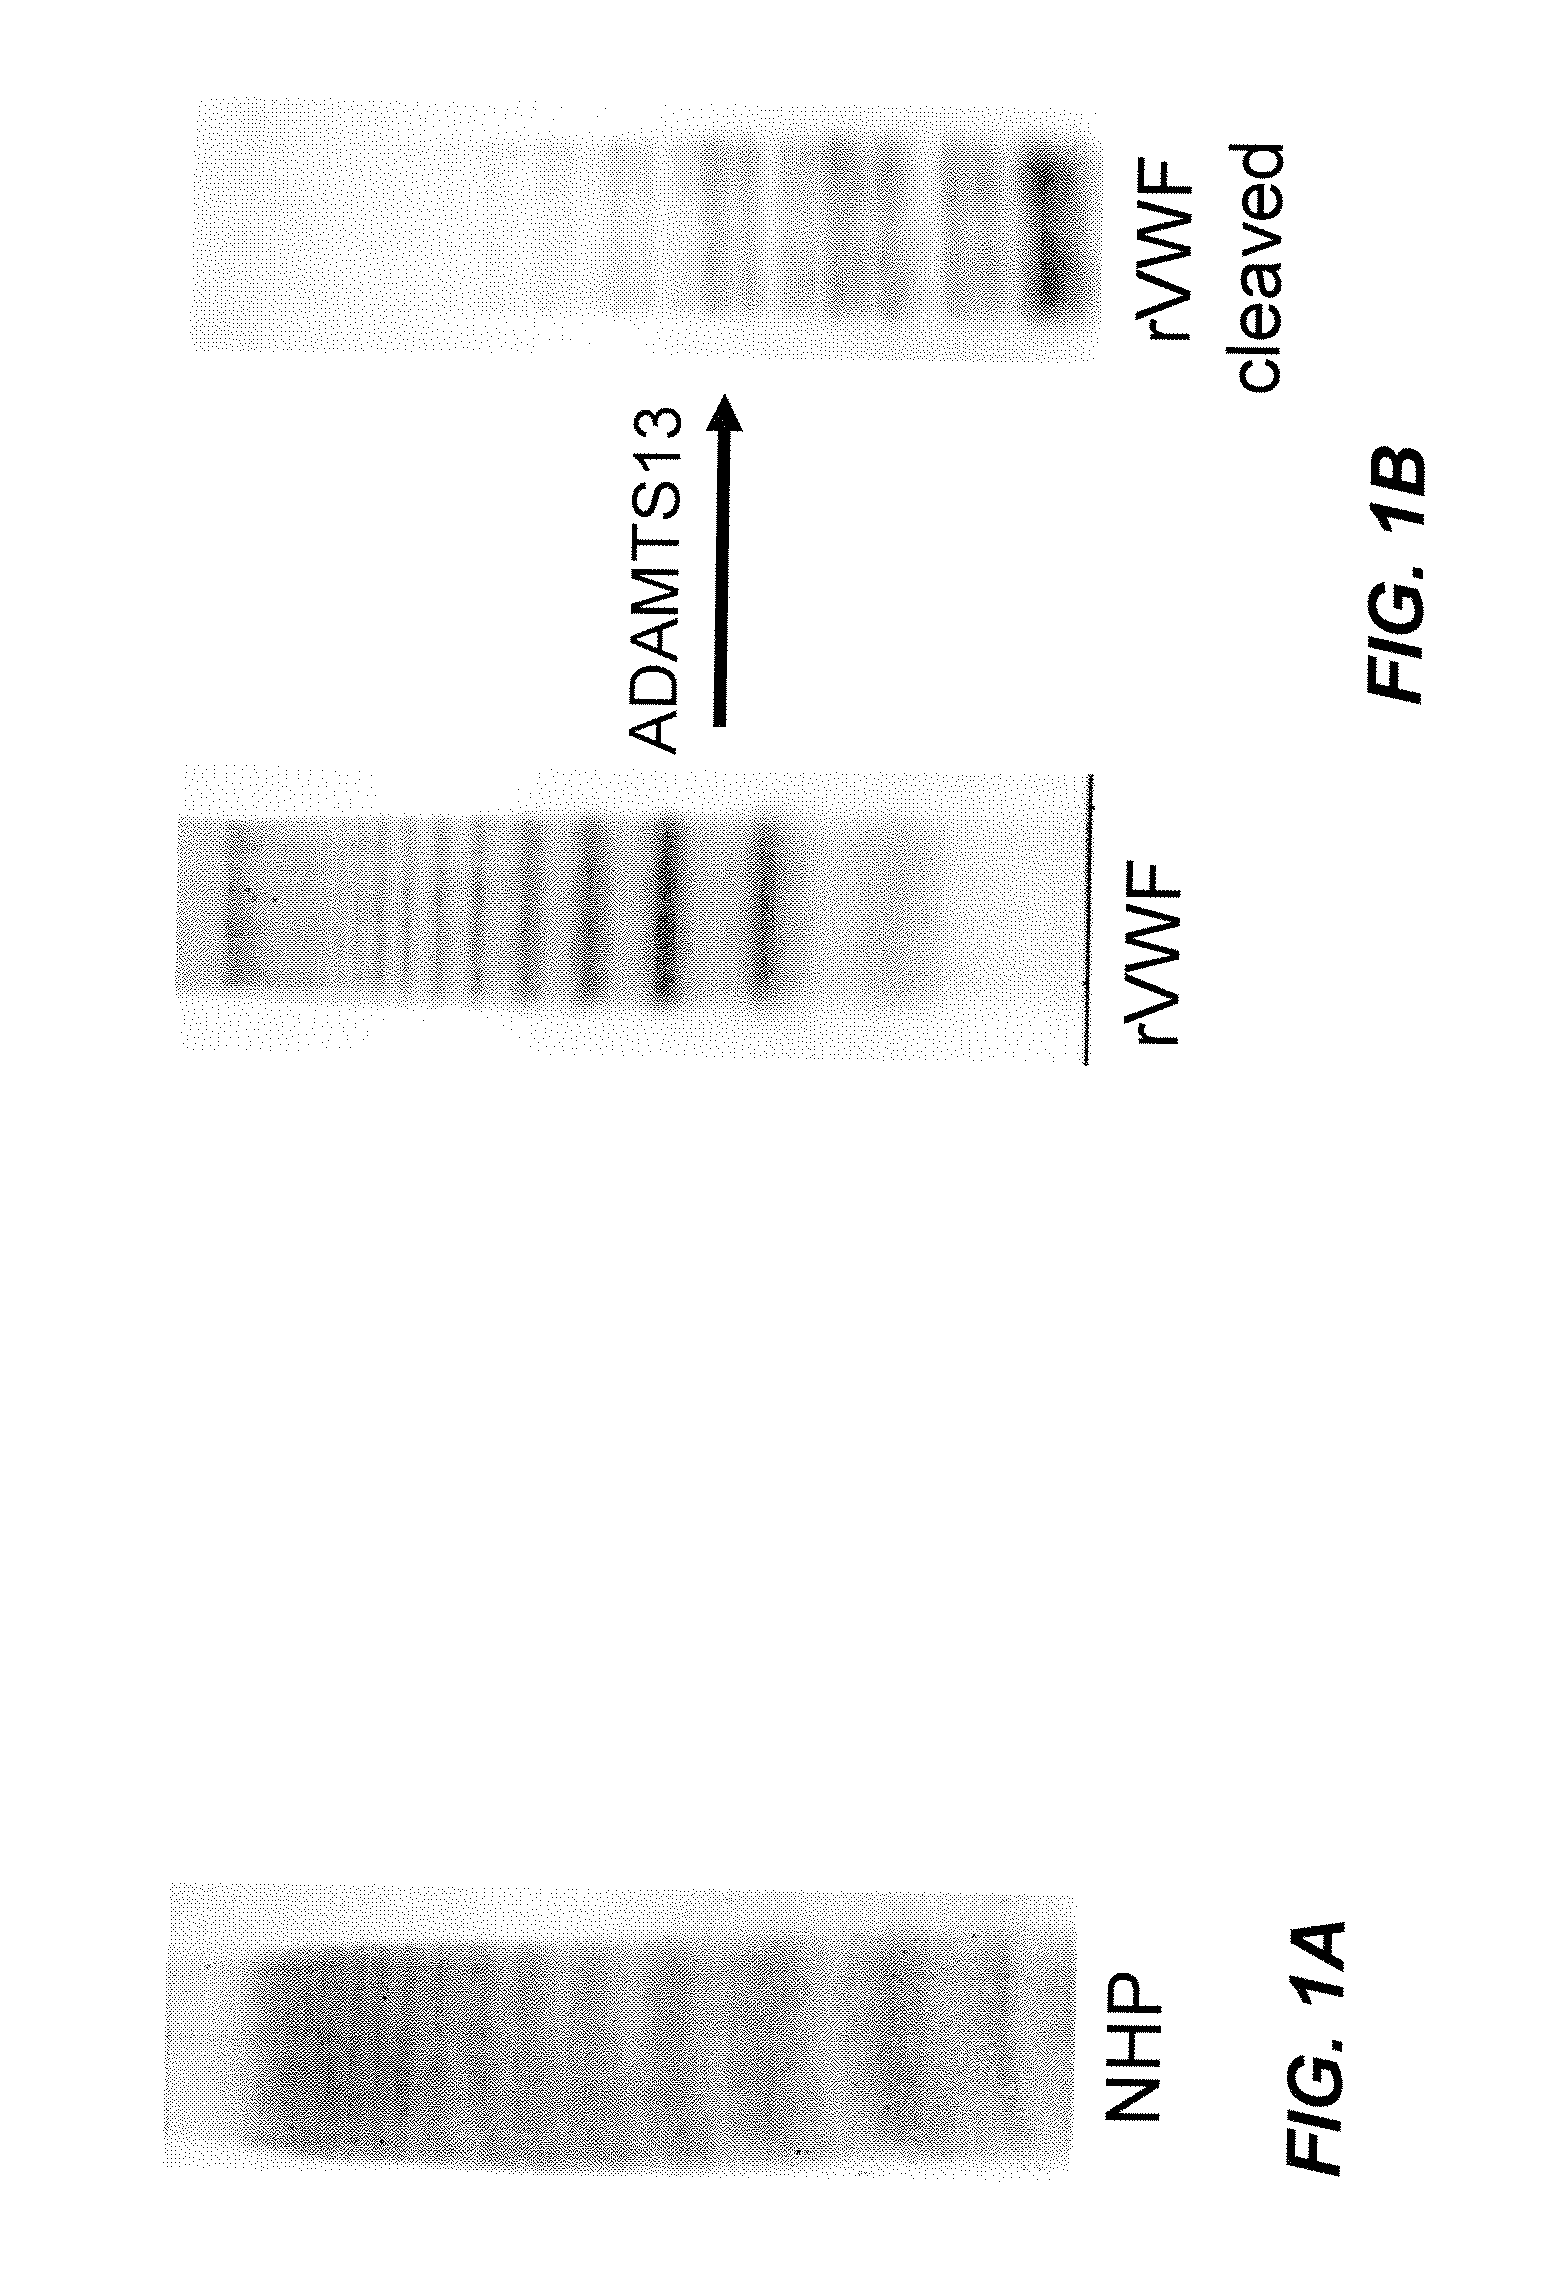 Methods of measuring adamts13-mediated in vivo cleavage of von willebrand factor and uses thereof